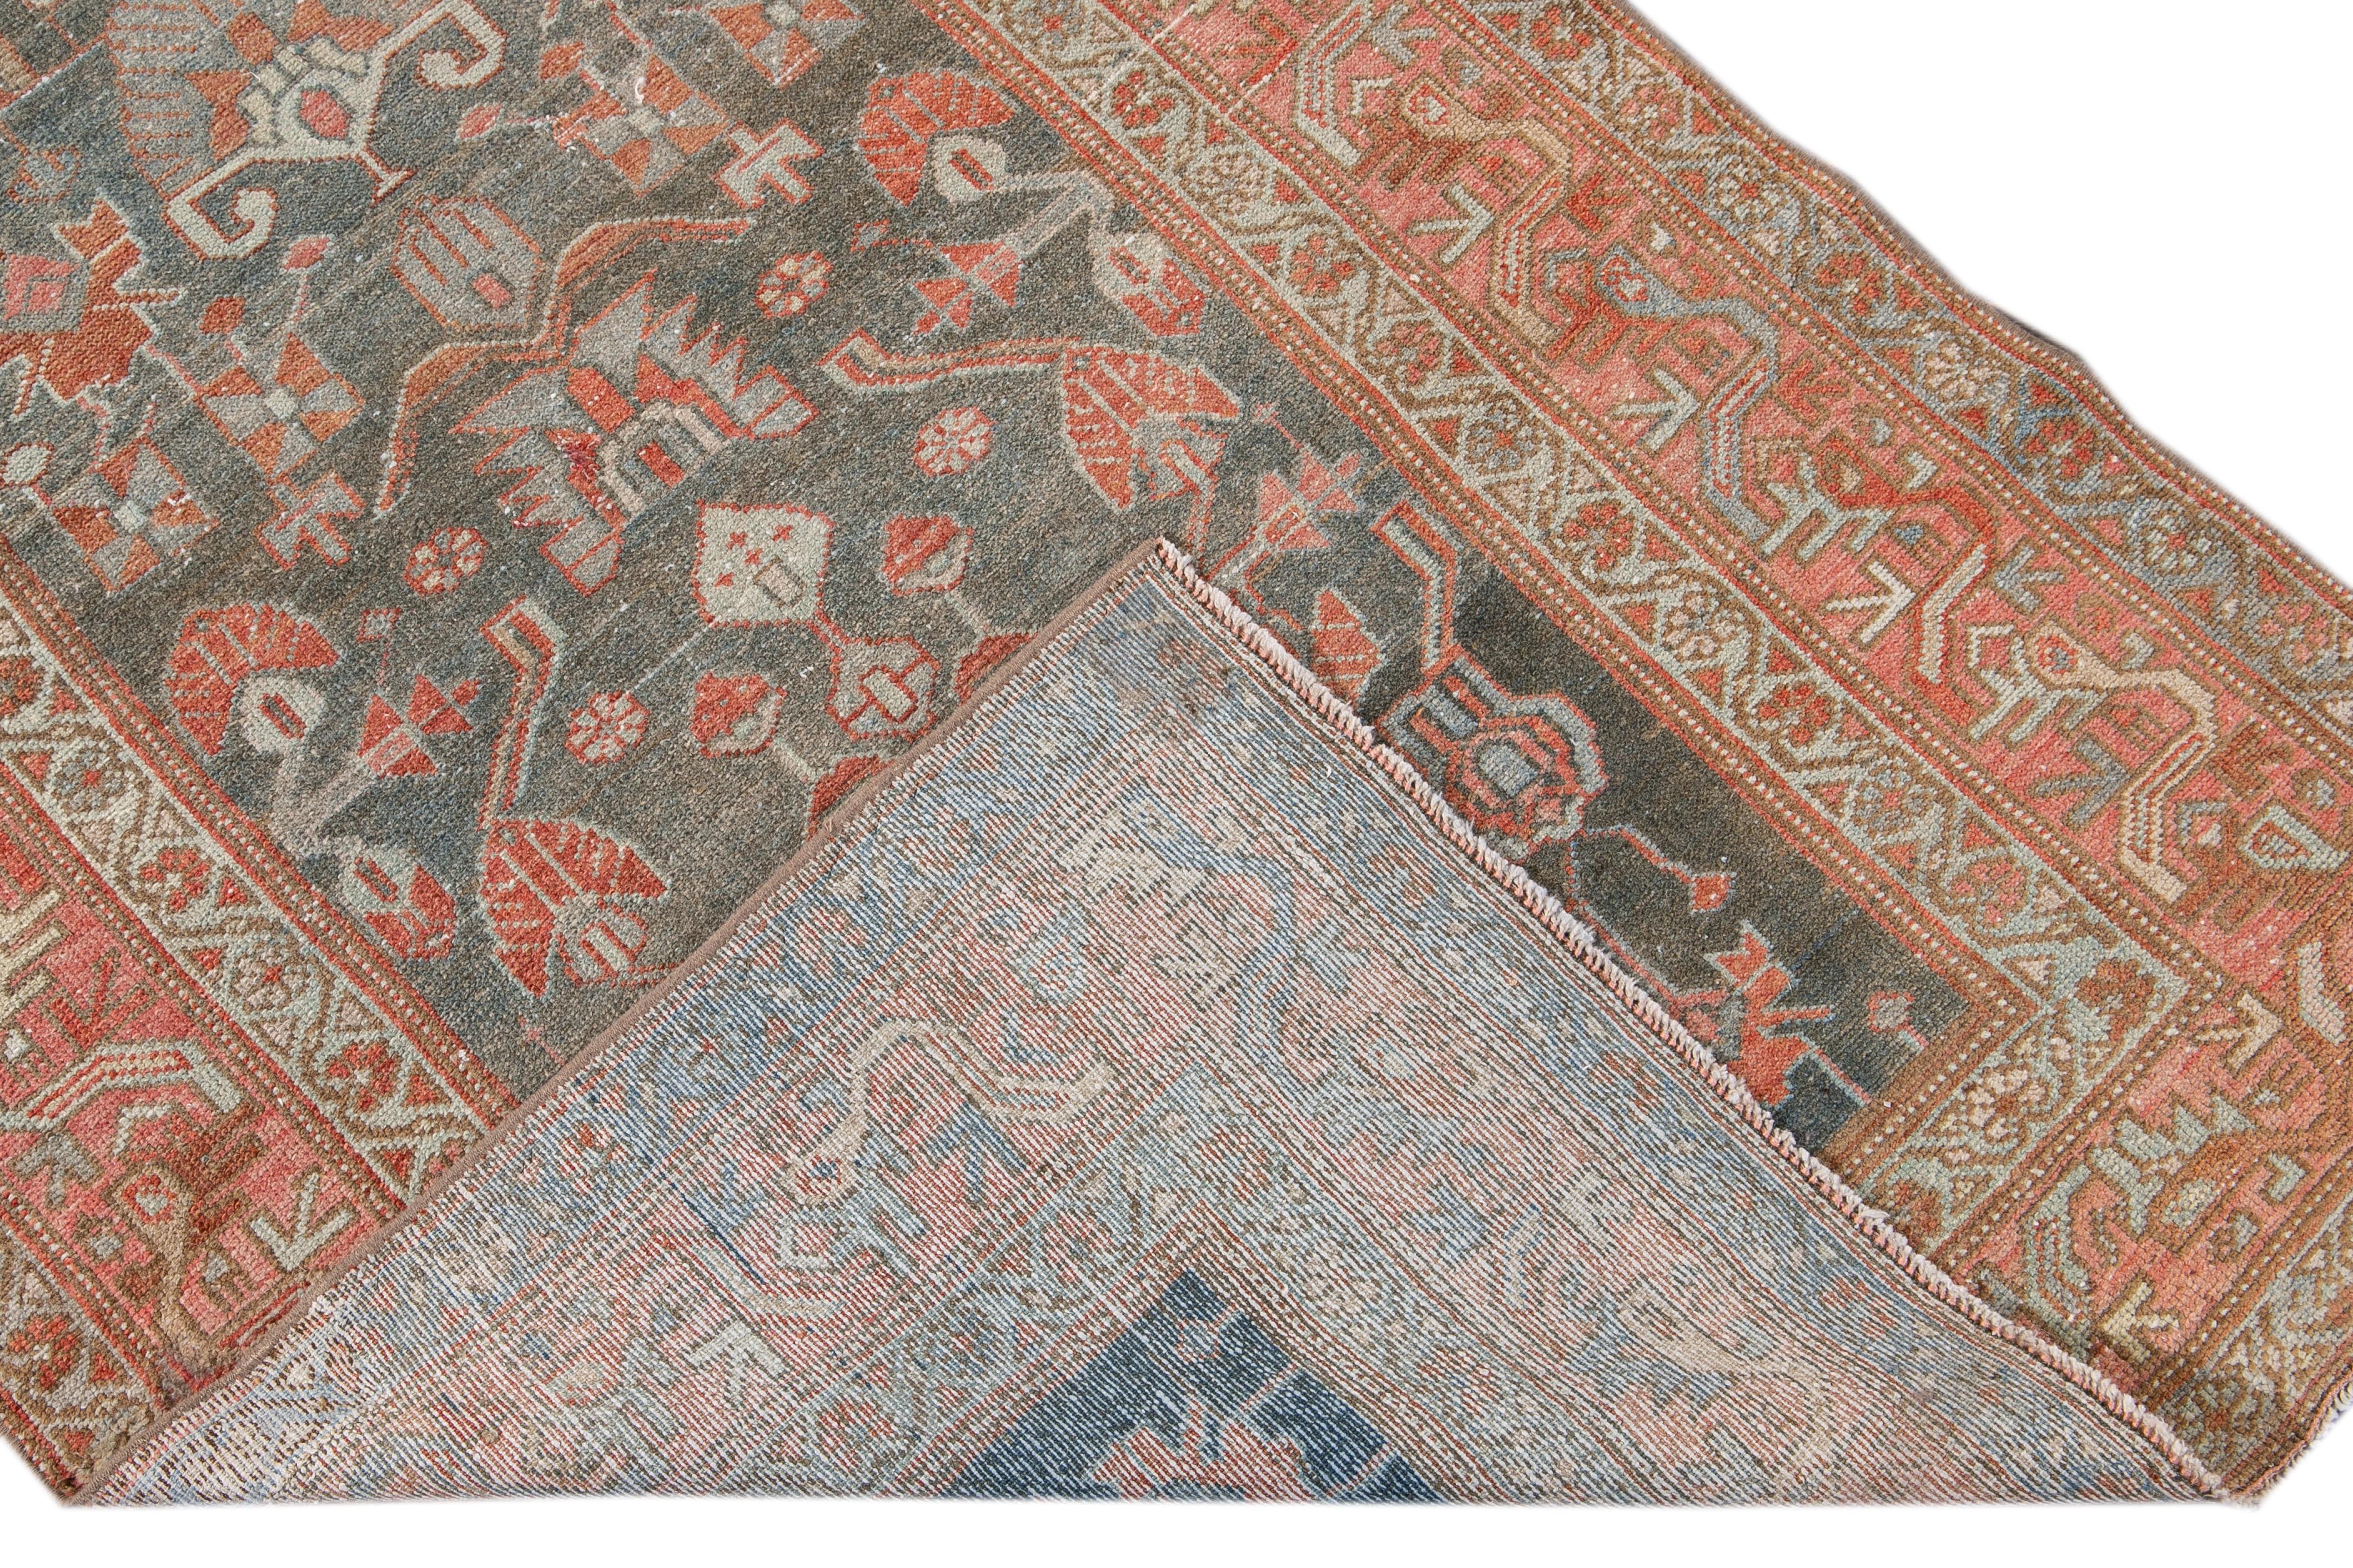 Beautiful antique Malayer hand-knotted wool rug with a navy-blue field. This Malayer rug has a peach and rusted frame and accents of beige and orange in an all-over gorgeous medallion floral design.

This rug measures: 3'6